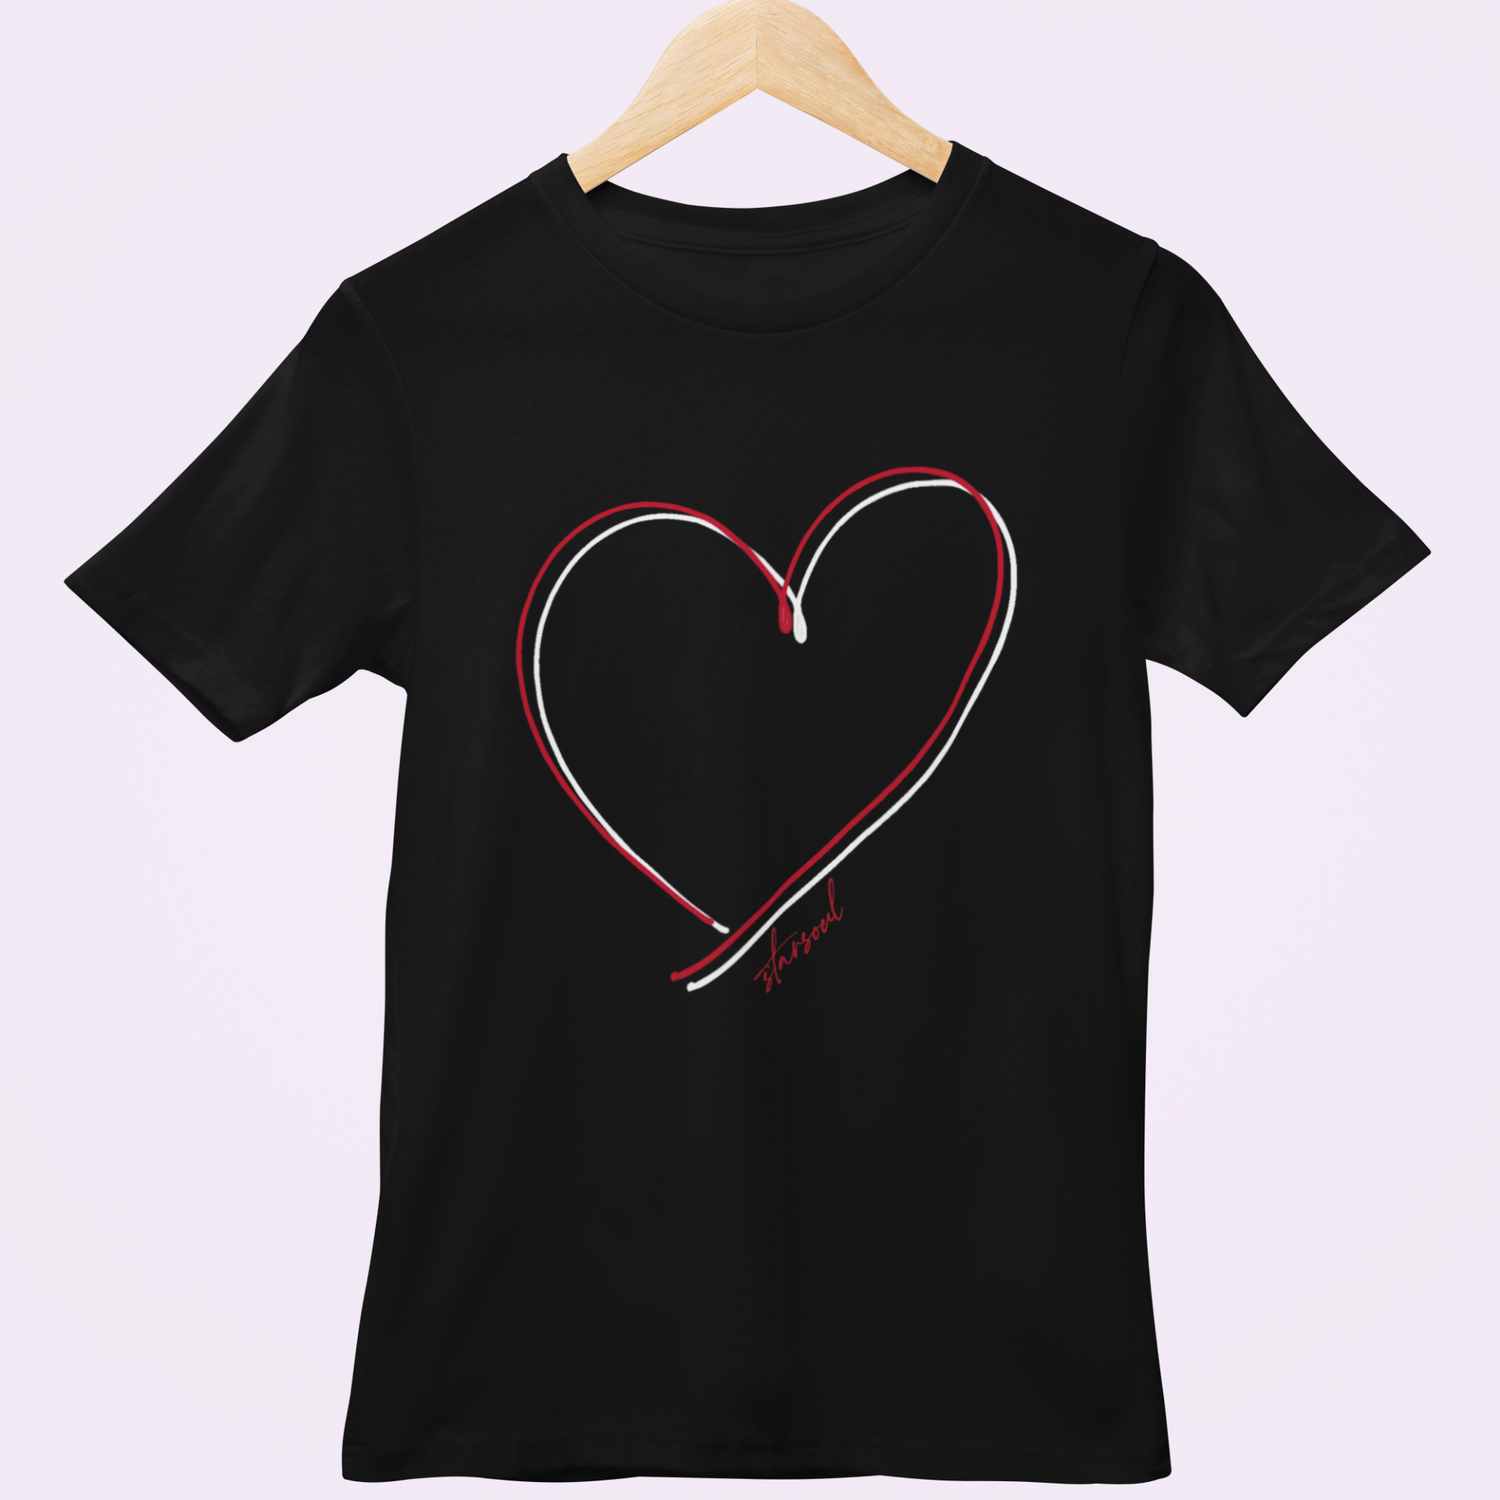 black charity t-shirt with red ad white double heart design for heart disease